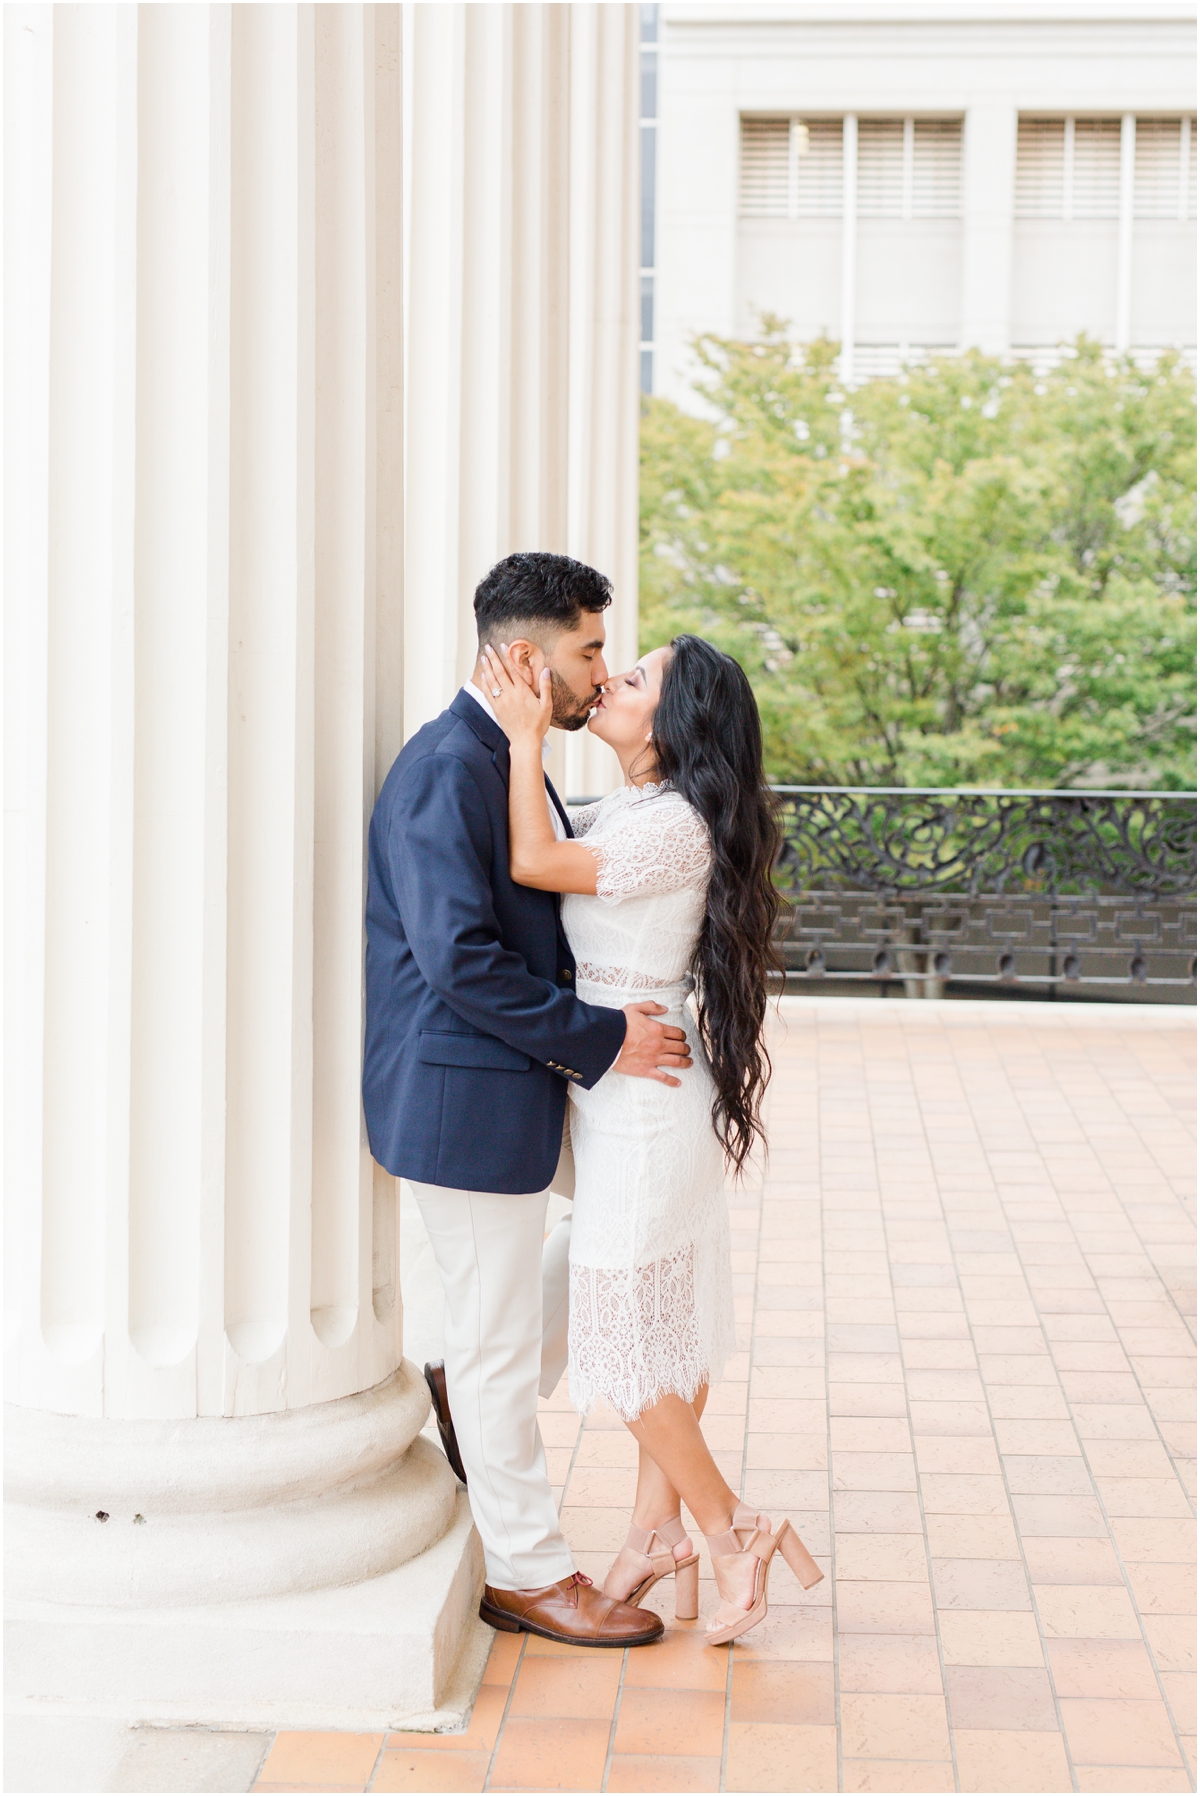 Classy Downtown Greenville Engagement Session by Grace Church with white & navy outfits